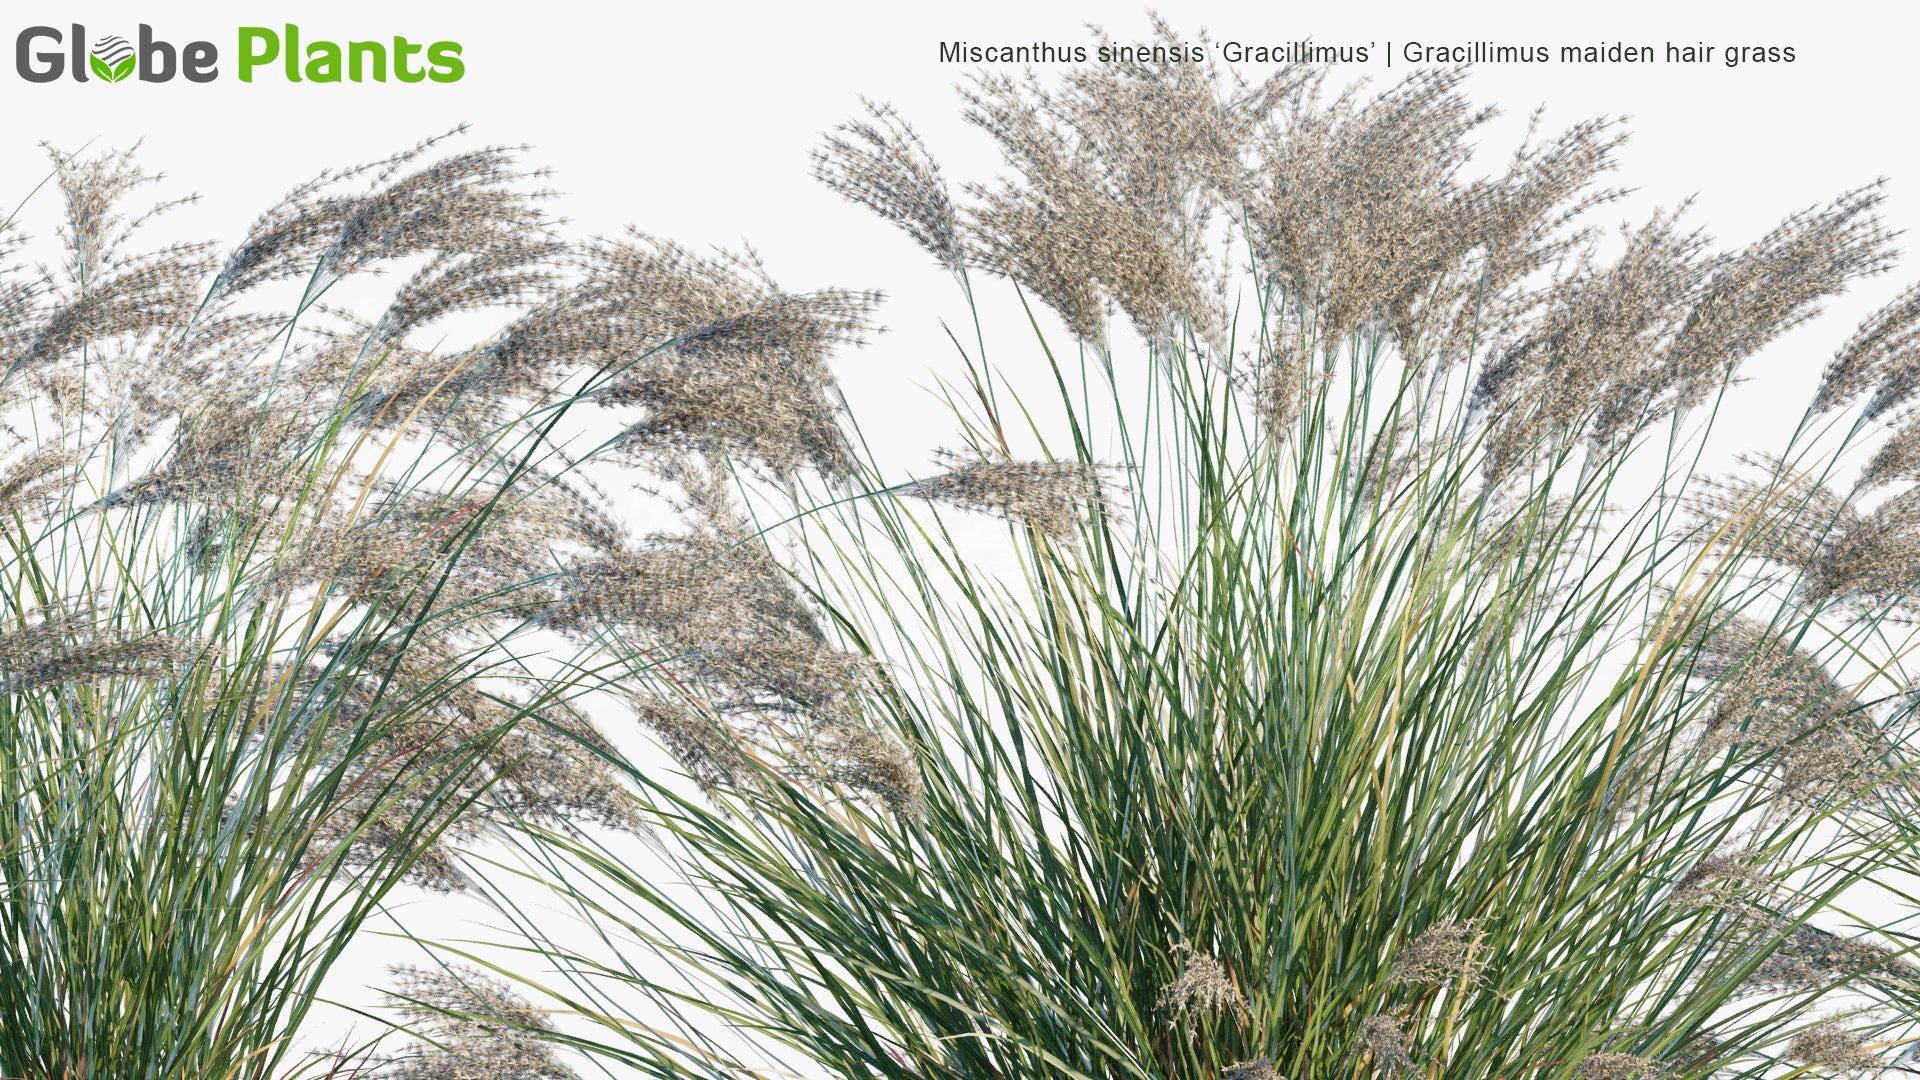 Low Poly Miscanthus Sinensis 'Gracillimus' - Gracillimus Maiden Hair Grass (3D Model)